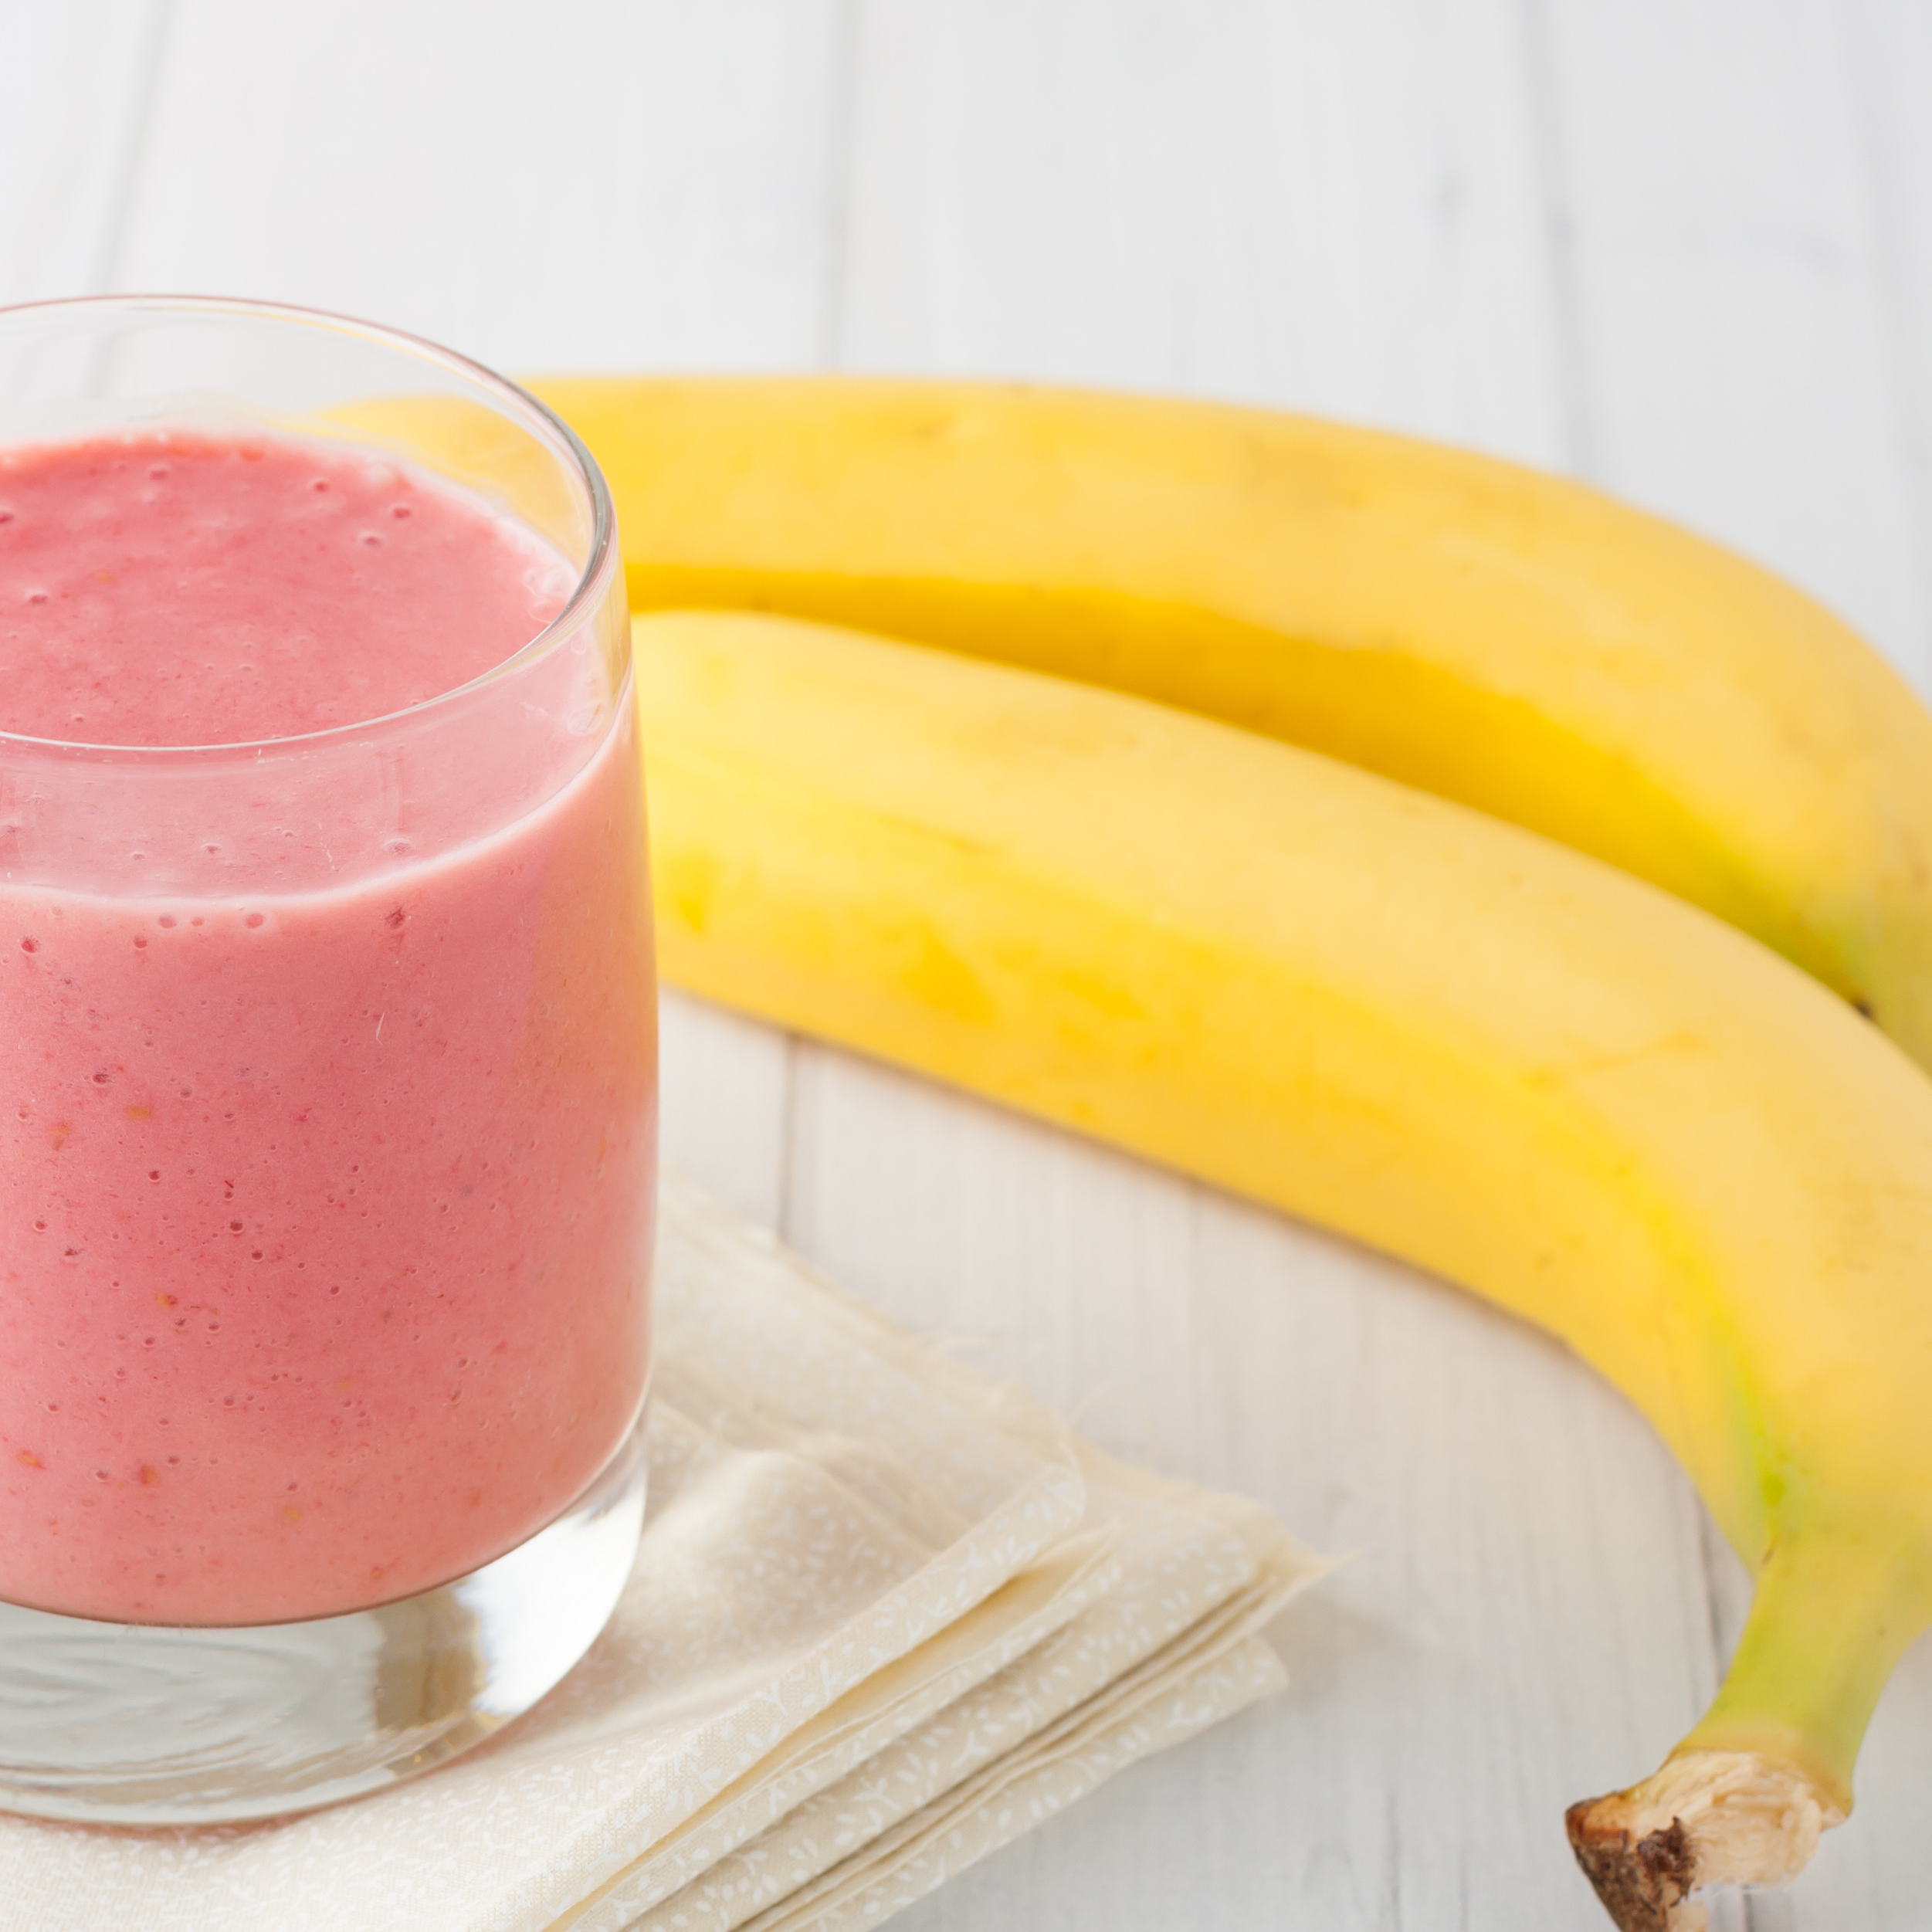 A photo of a no seed glass of strawberry banana smoothie next to two whole bananas and a white napkin, representing nutritious and soft food options for post-operative dental care.